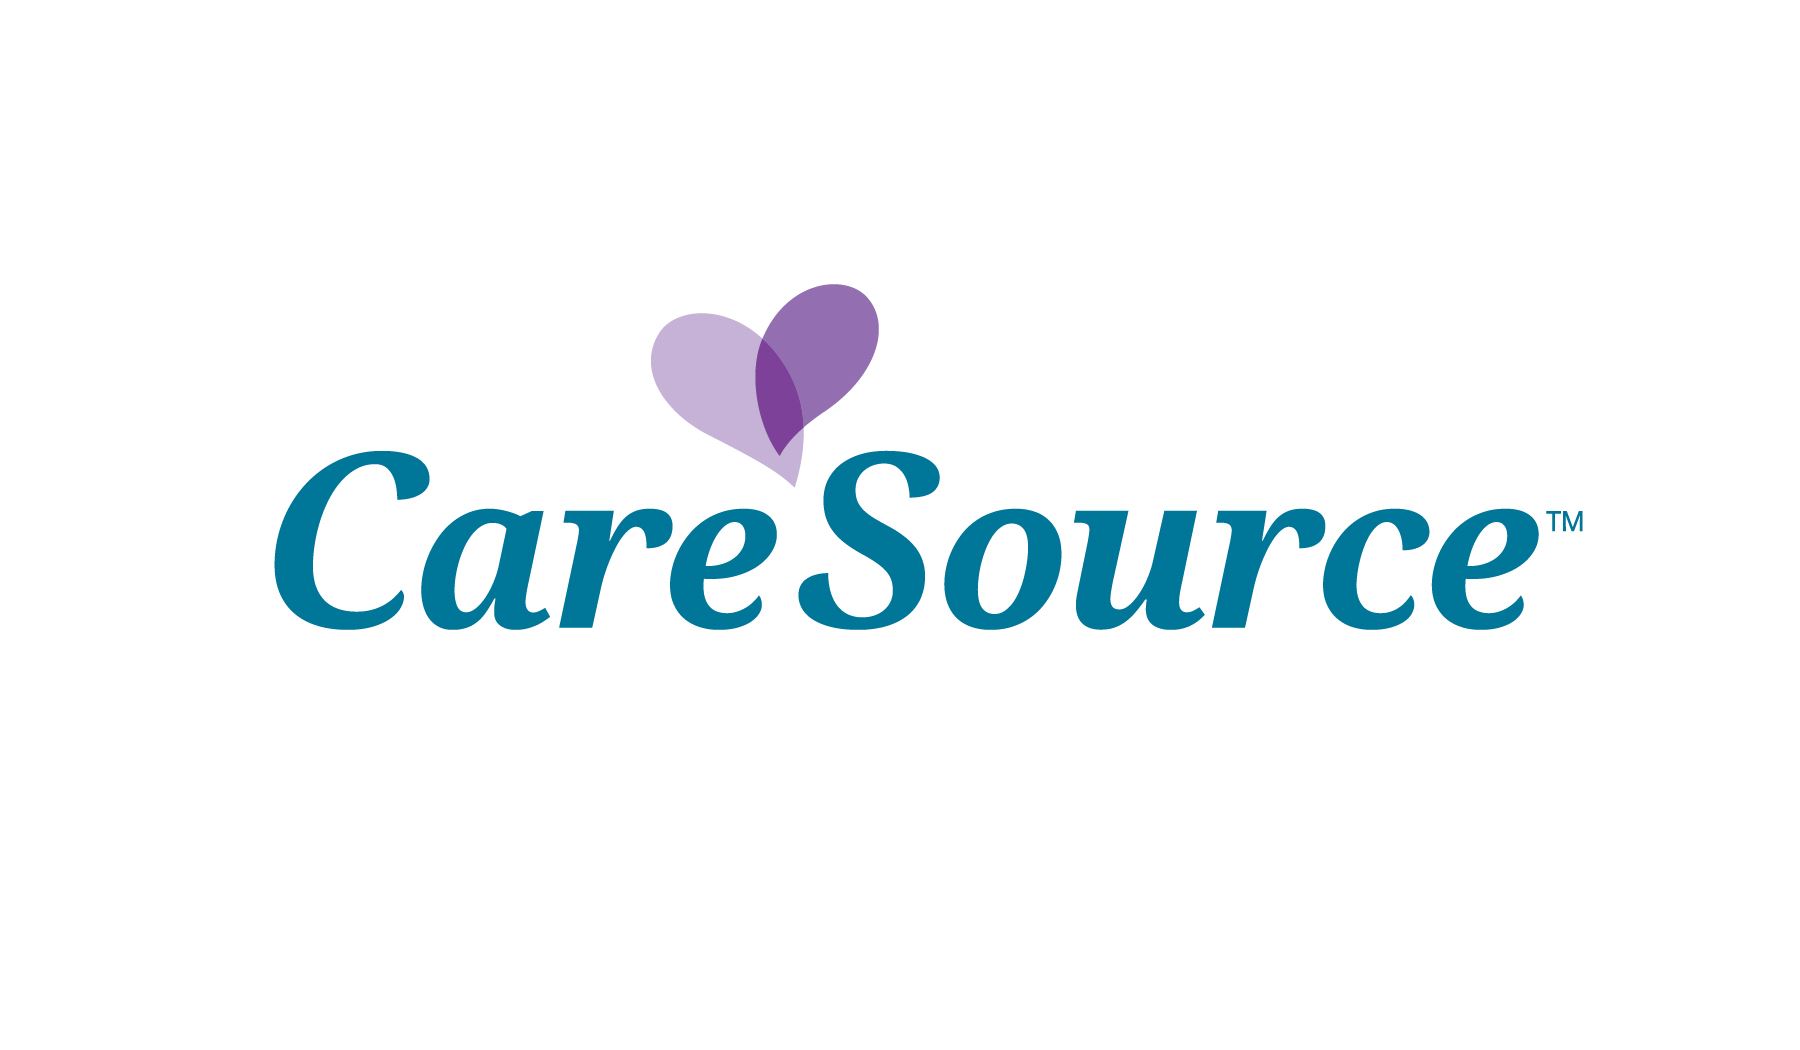 Click to visit the Caresource website